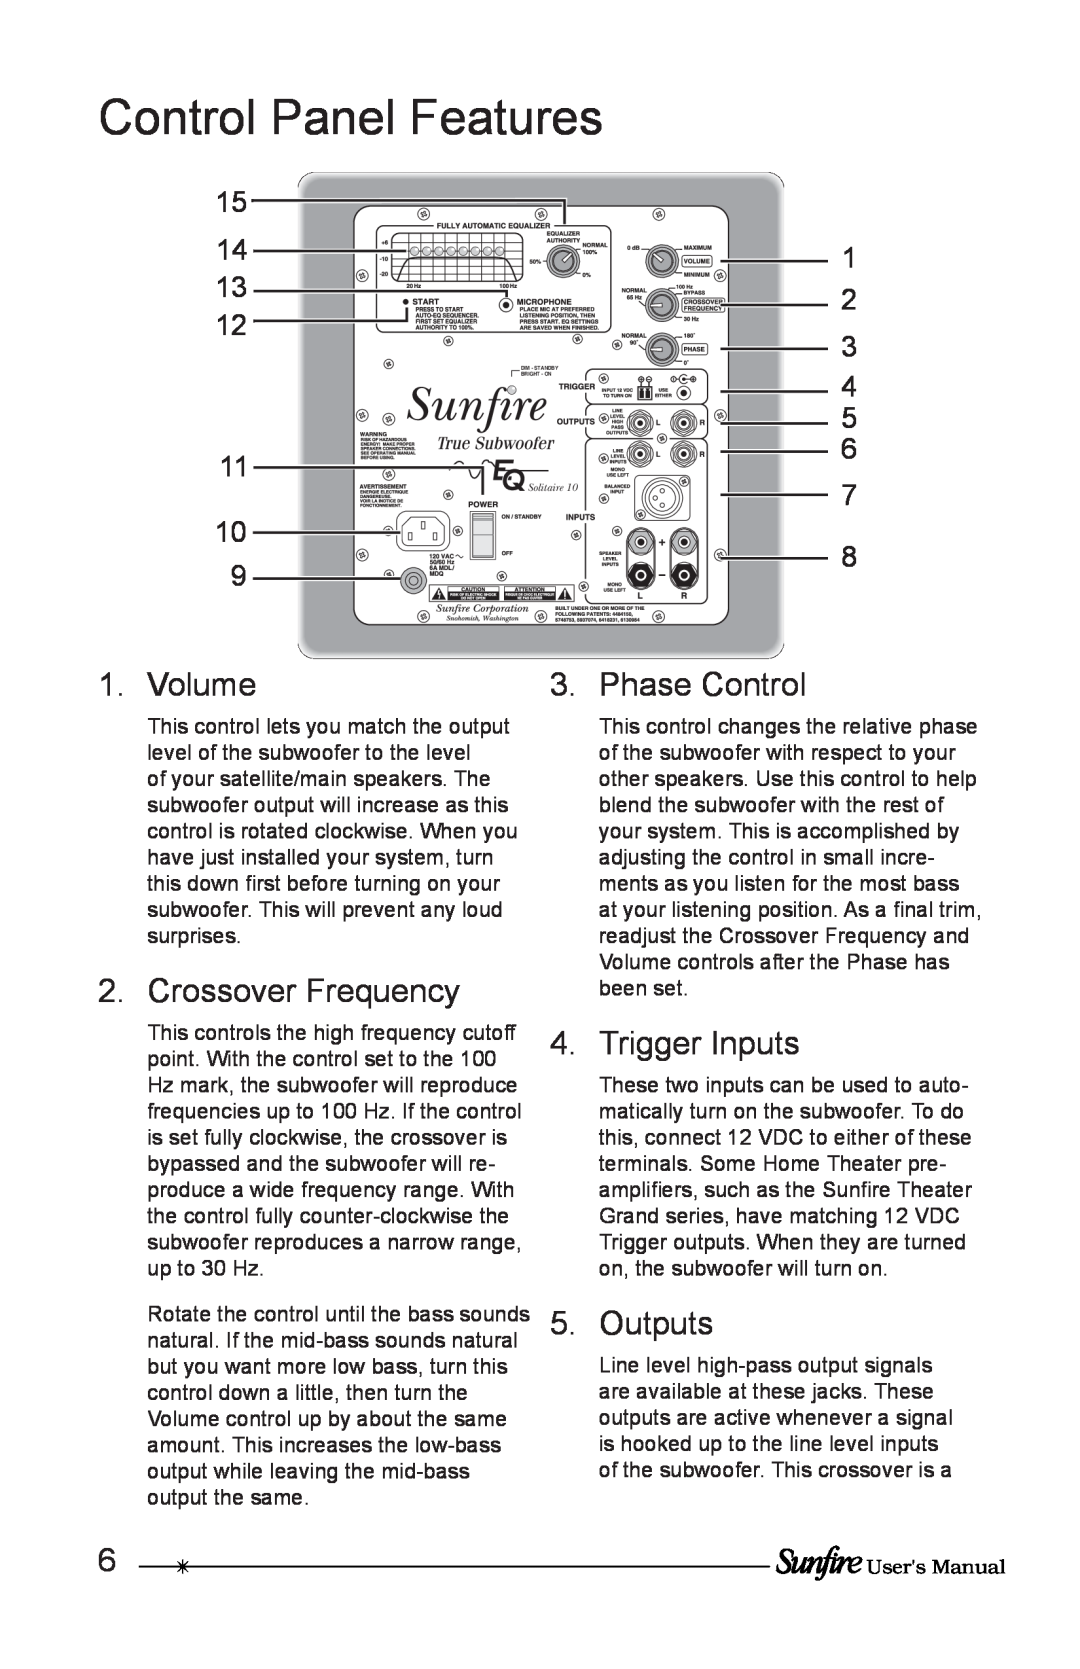 Sunfire Solitaire 10 Control Panel Features, Volume, Crossover Frequency, Phase Control, Trigger Inputs, Outputs, 1 2 3 4 